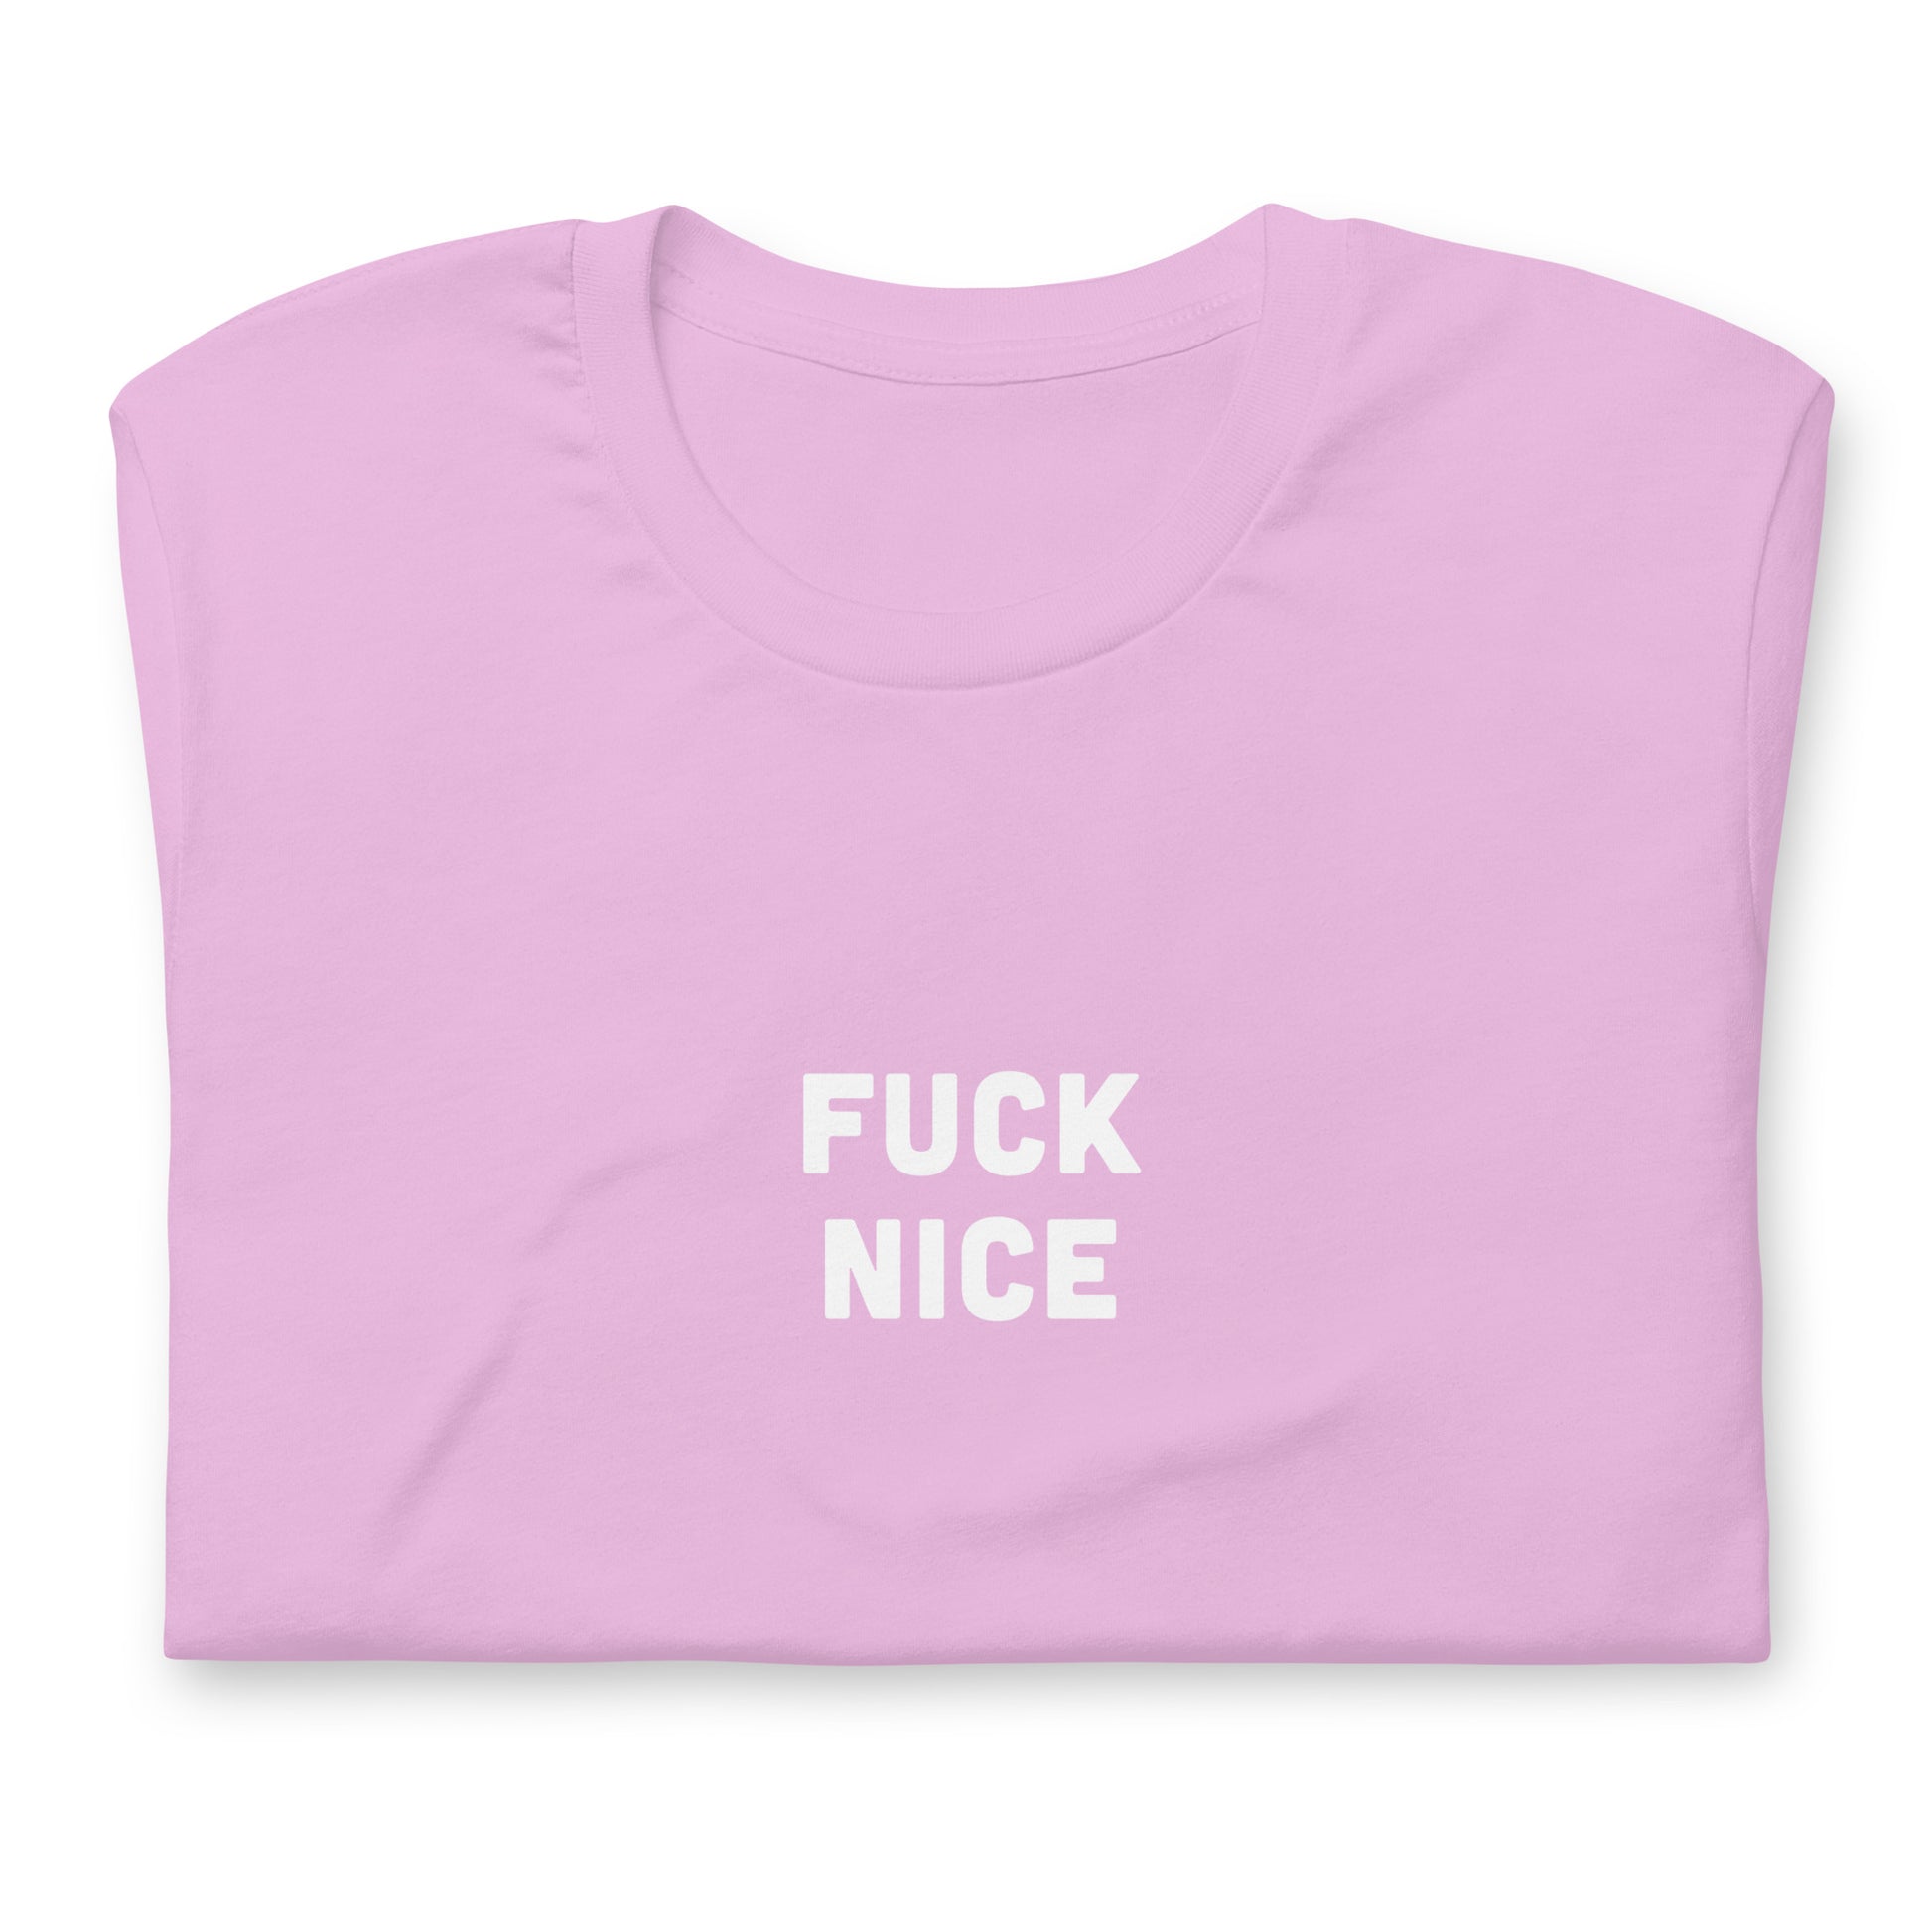 Fuck Nice T-Shirt Size XL Color Forest